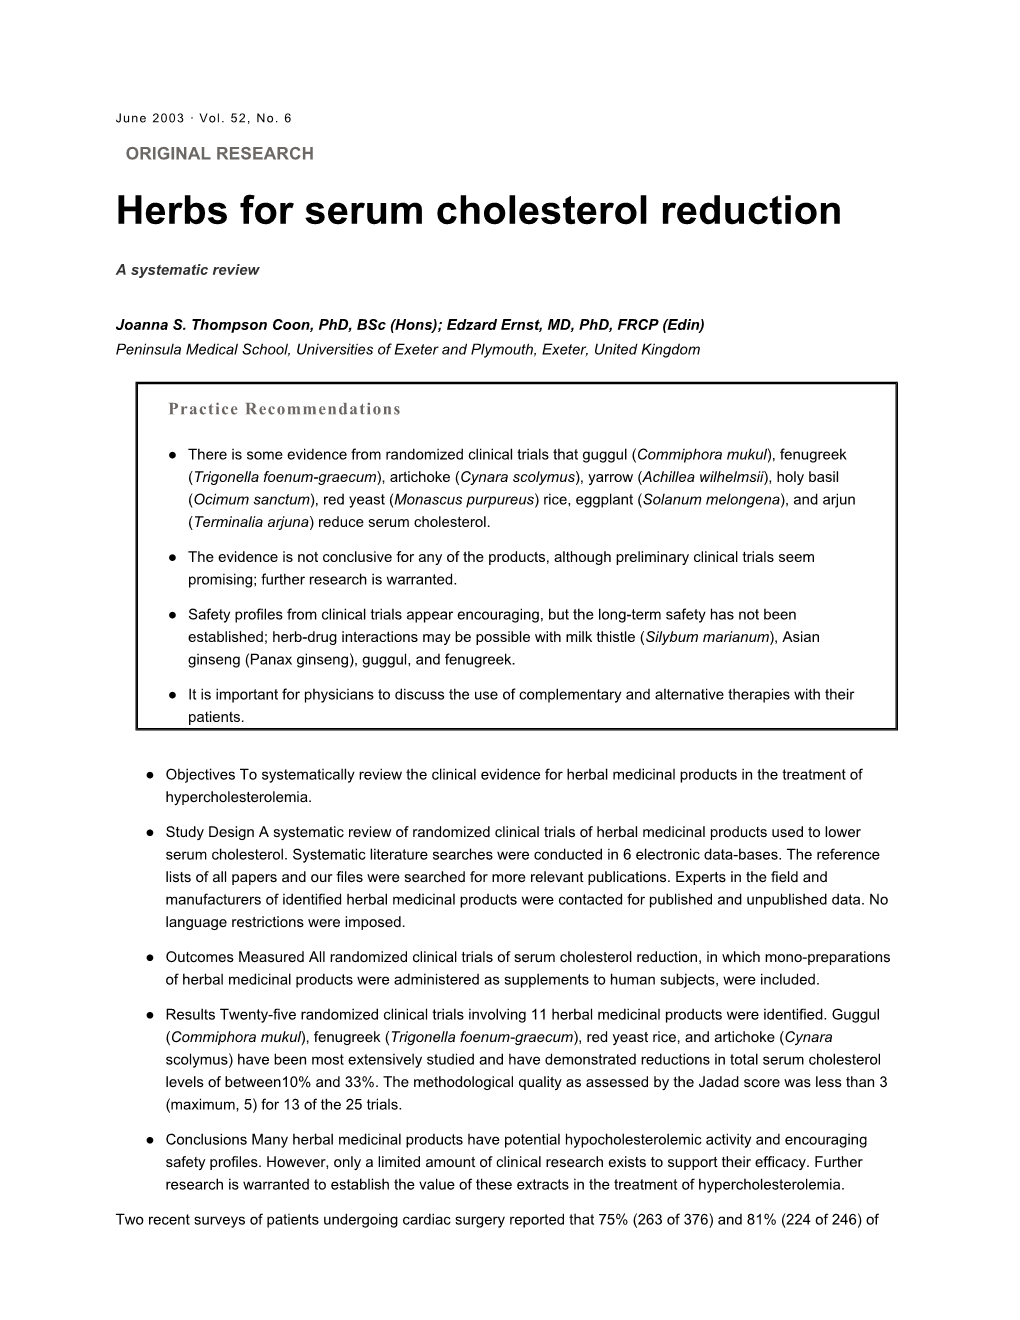 Herbs for Serum Cholesterol Reduction